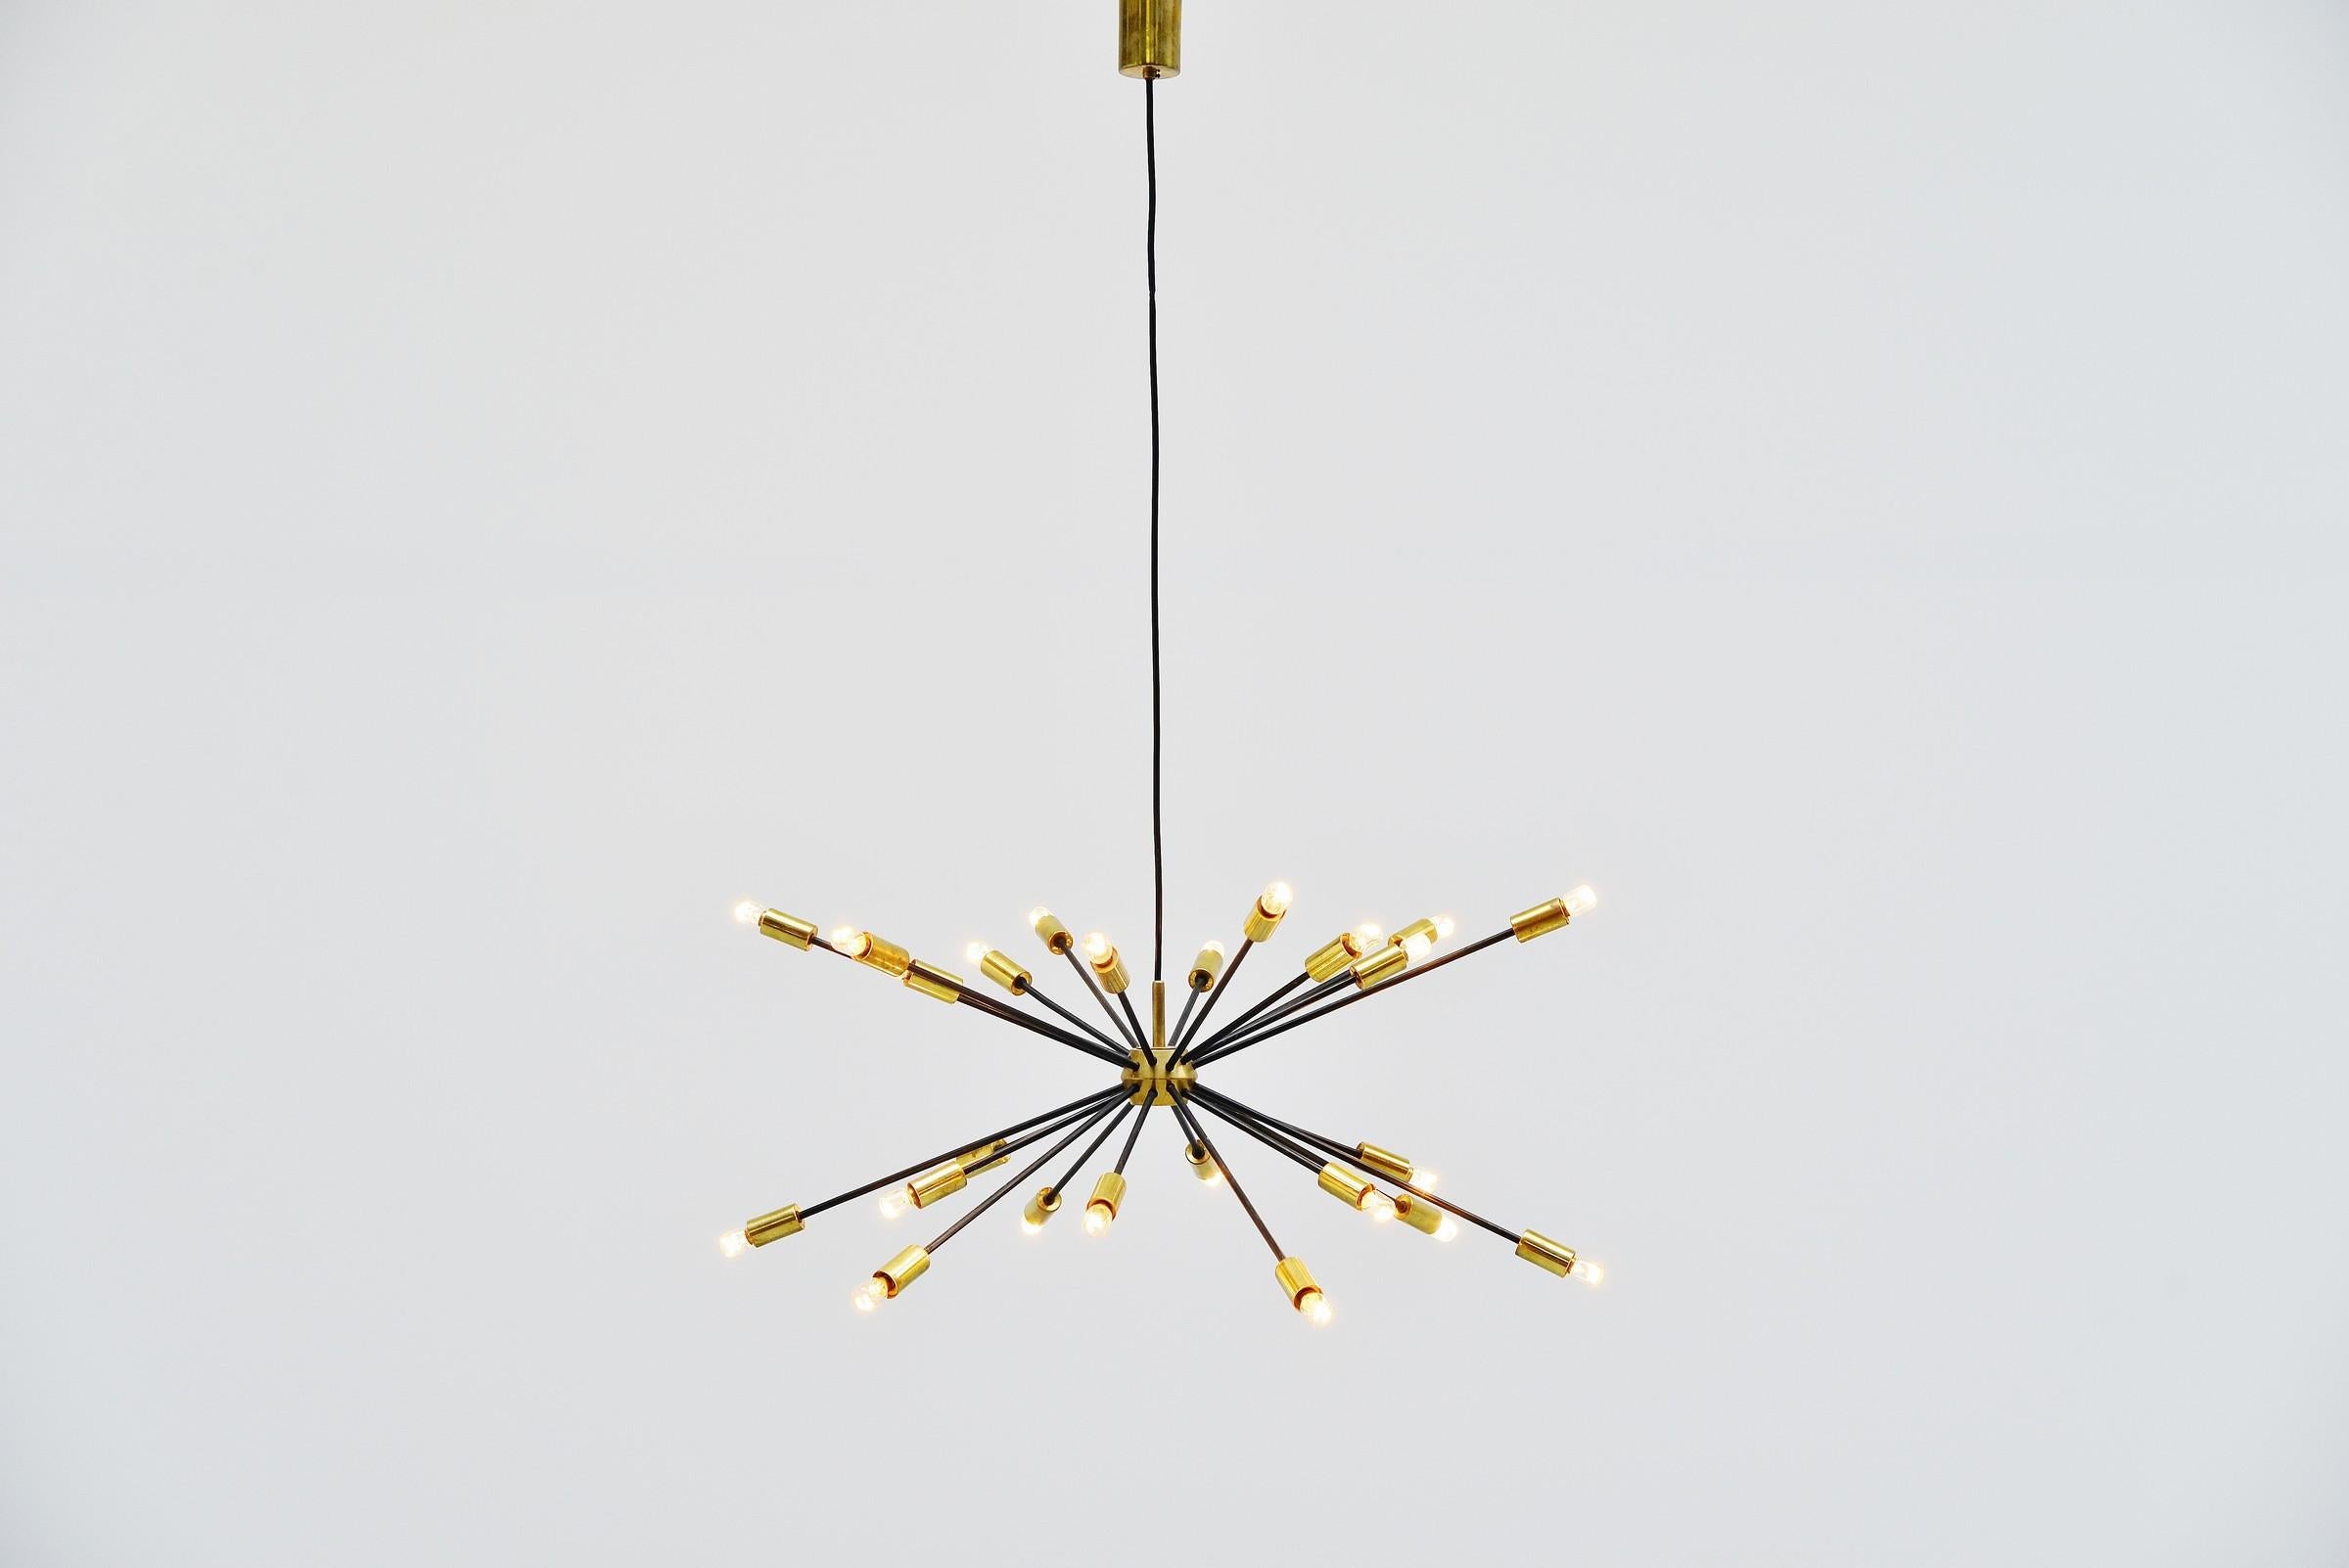 Stunning so called firework chandelier model 2003 irr designed by Gino Sarfatti and manufactured by Arteluce, Italy 1939. Highly rare and early chandelier by one of the best light designers of the 20th century. Visible small pear-shaped bulbs. Bulb